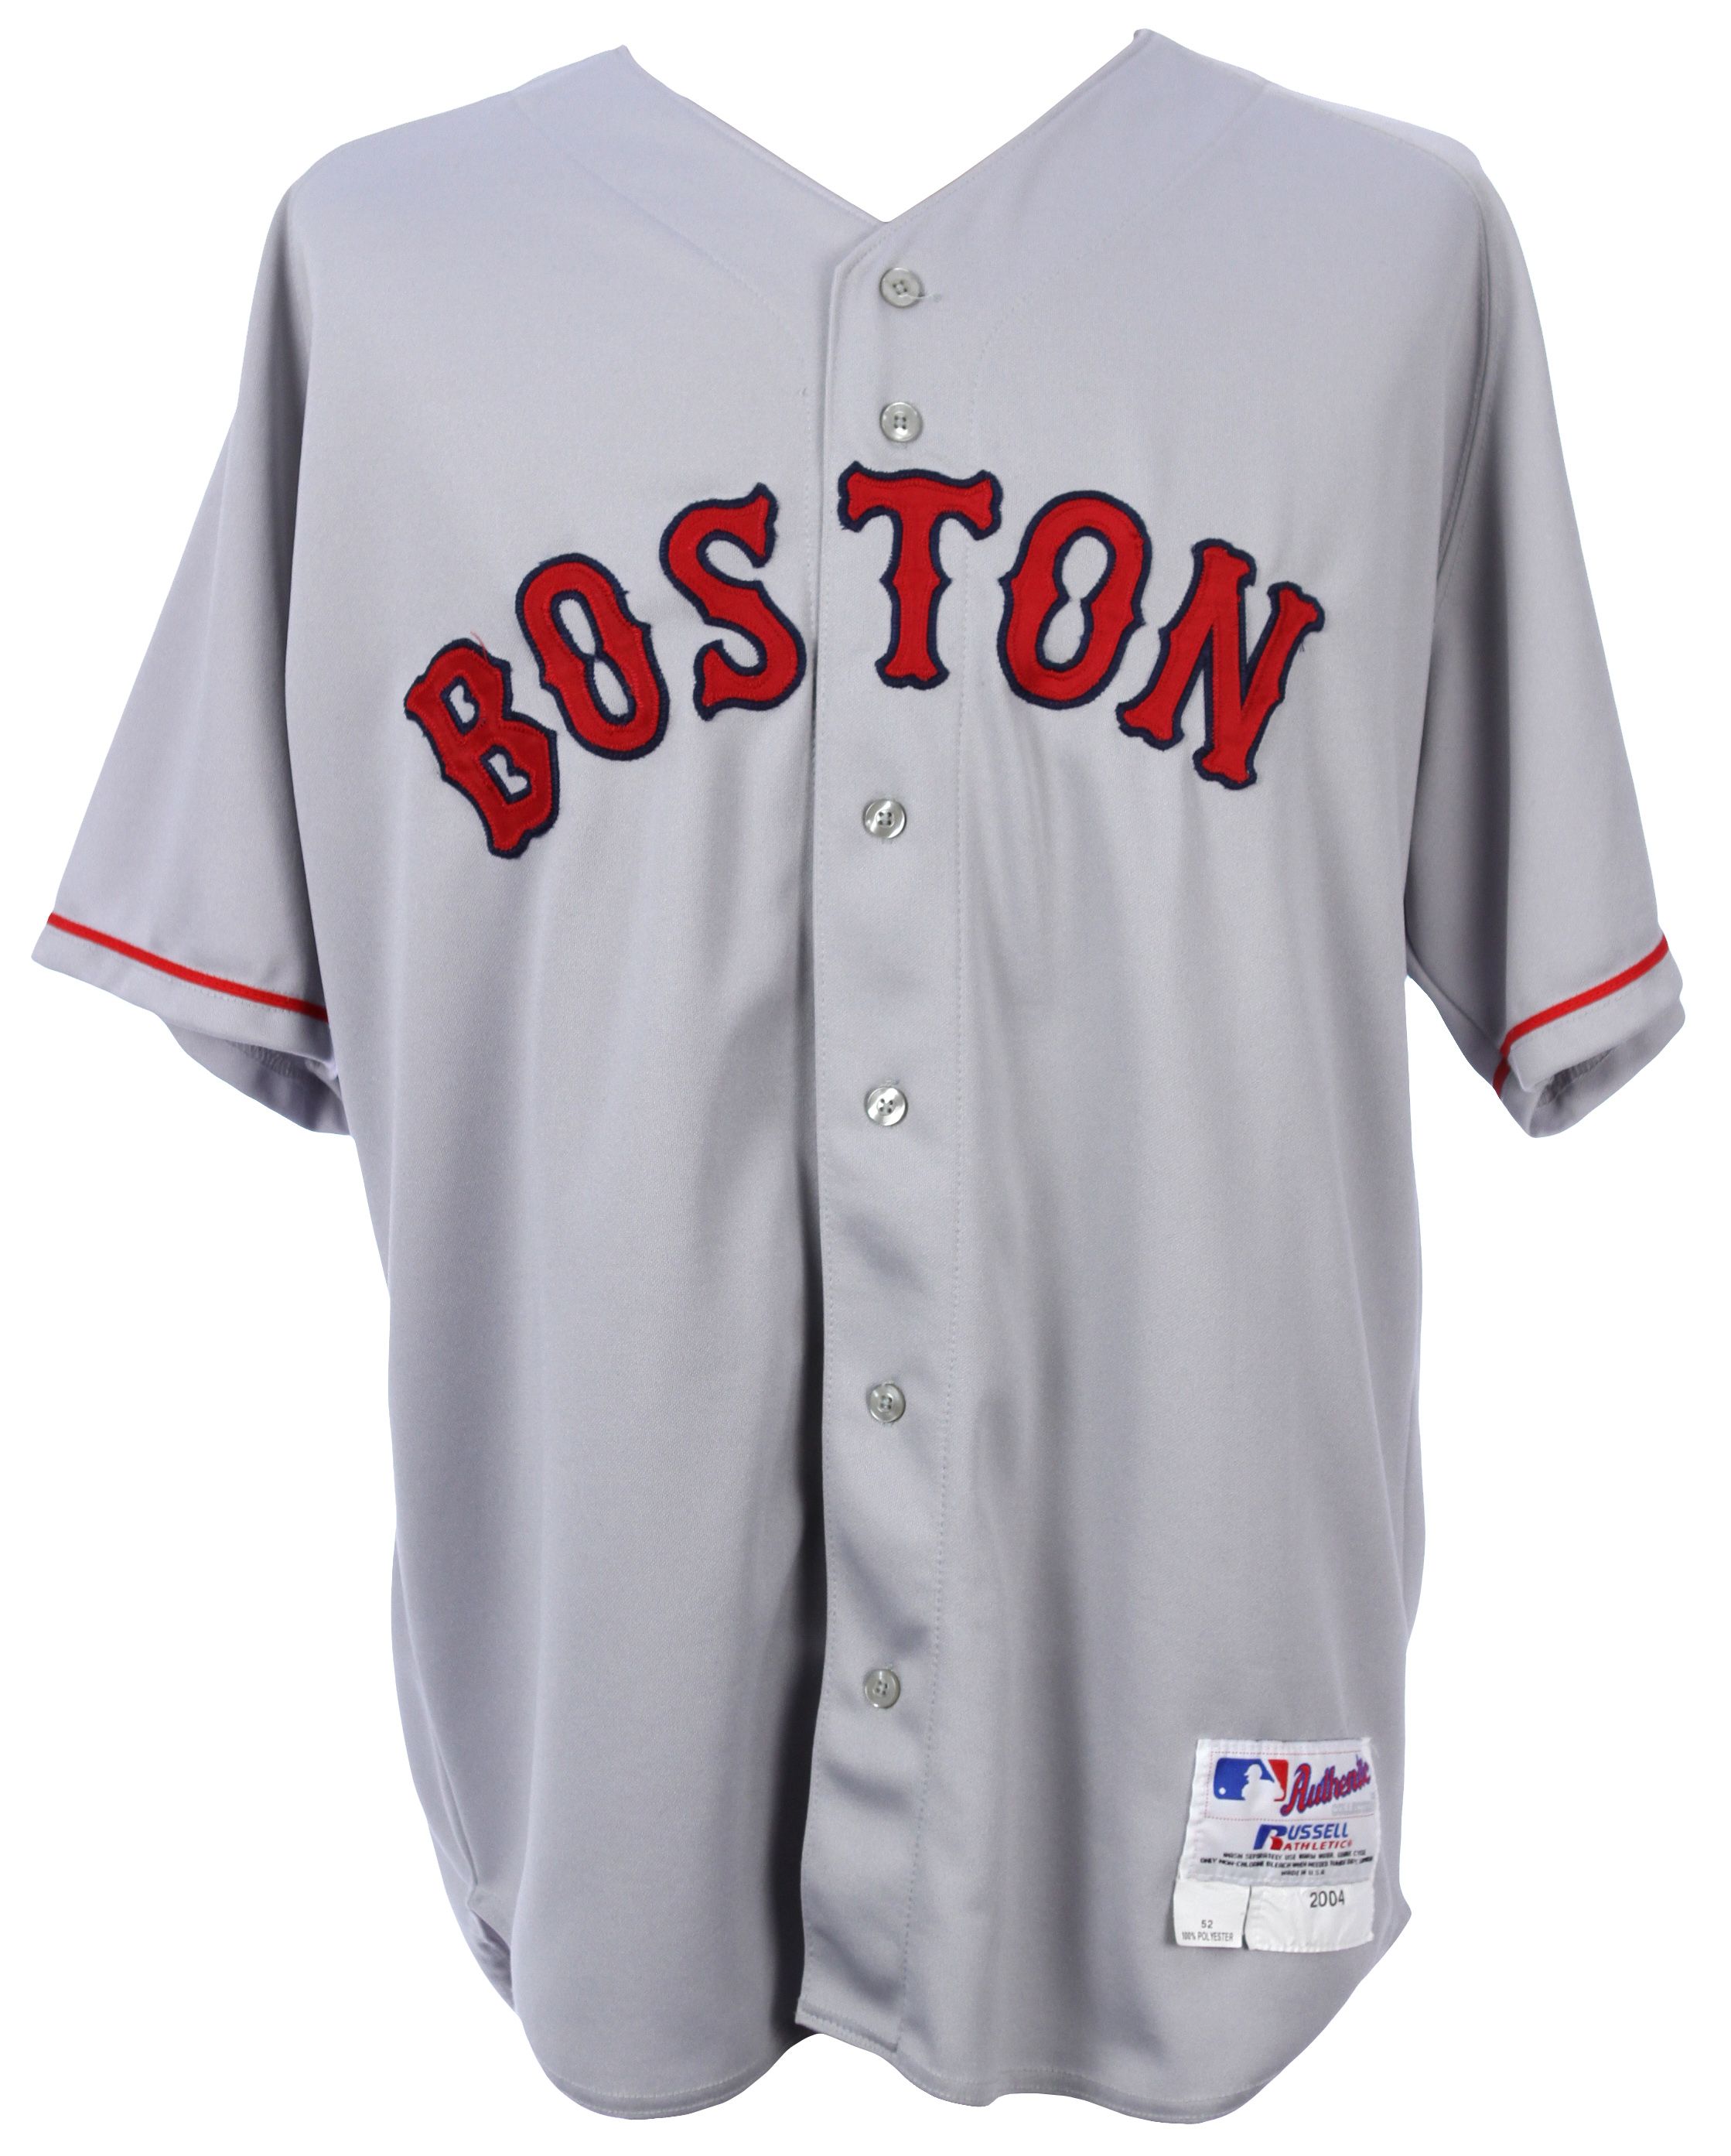 curt schilling red sox jersey